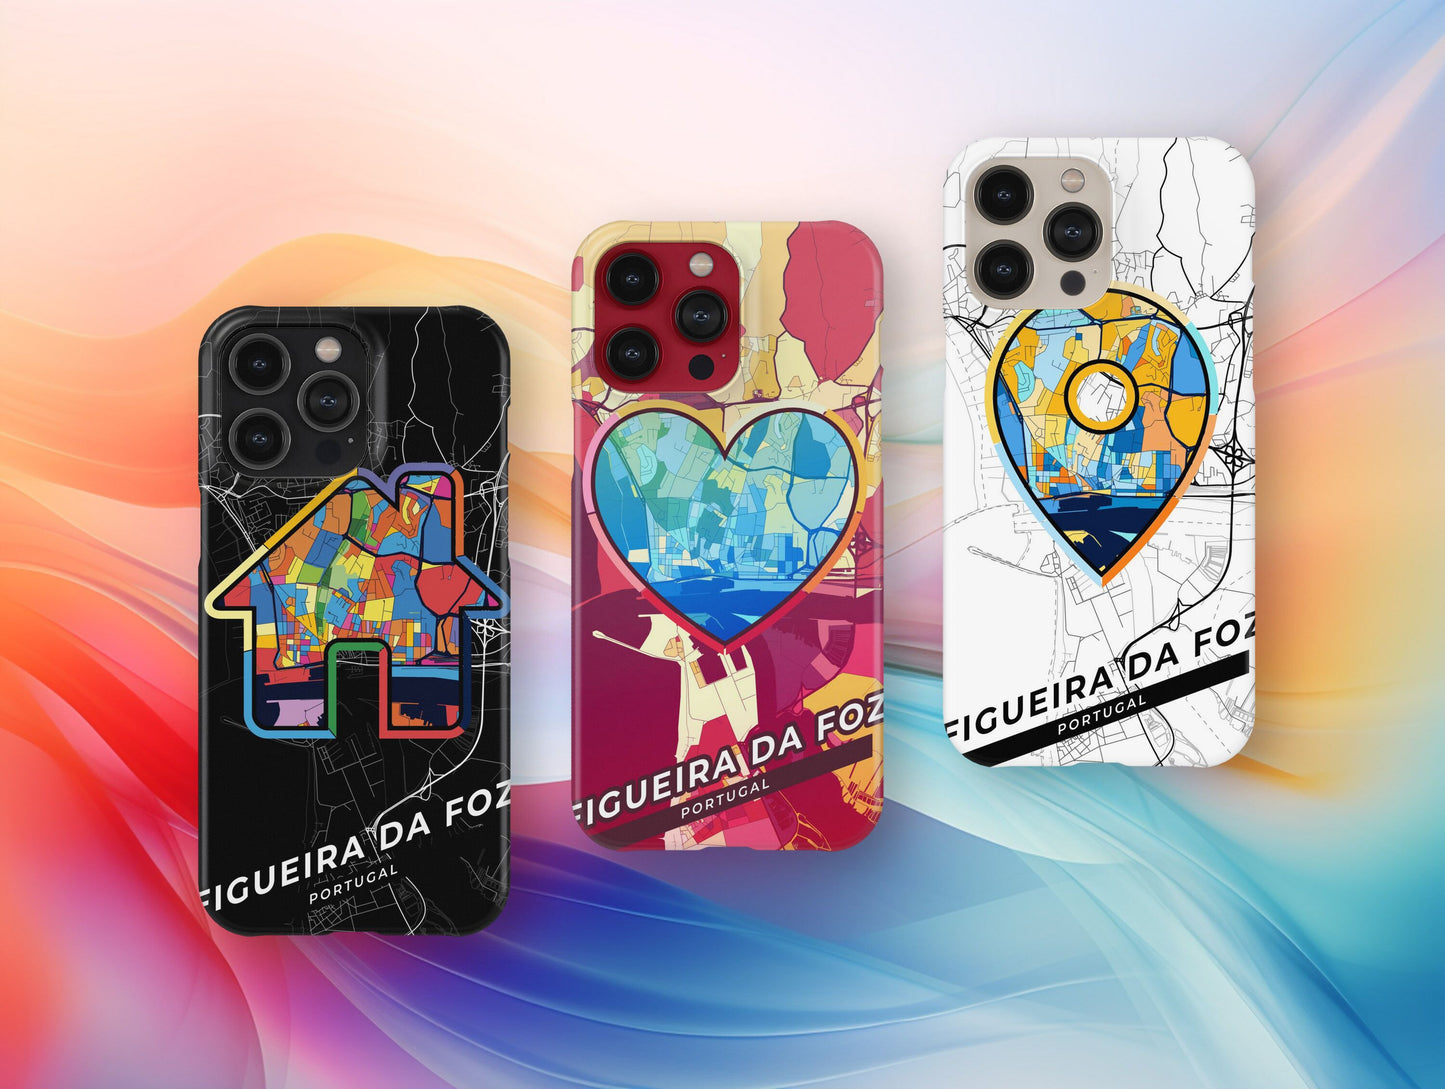 Figueira Da Foz Portugal slim phone case with colorful icon. Birthday, wedding or housewarming gift. Couple match cases.